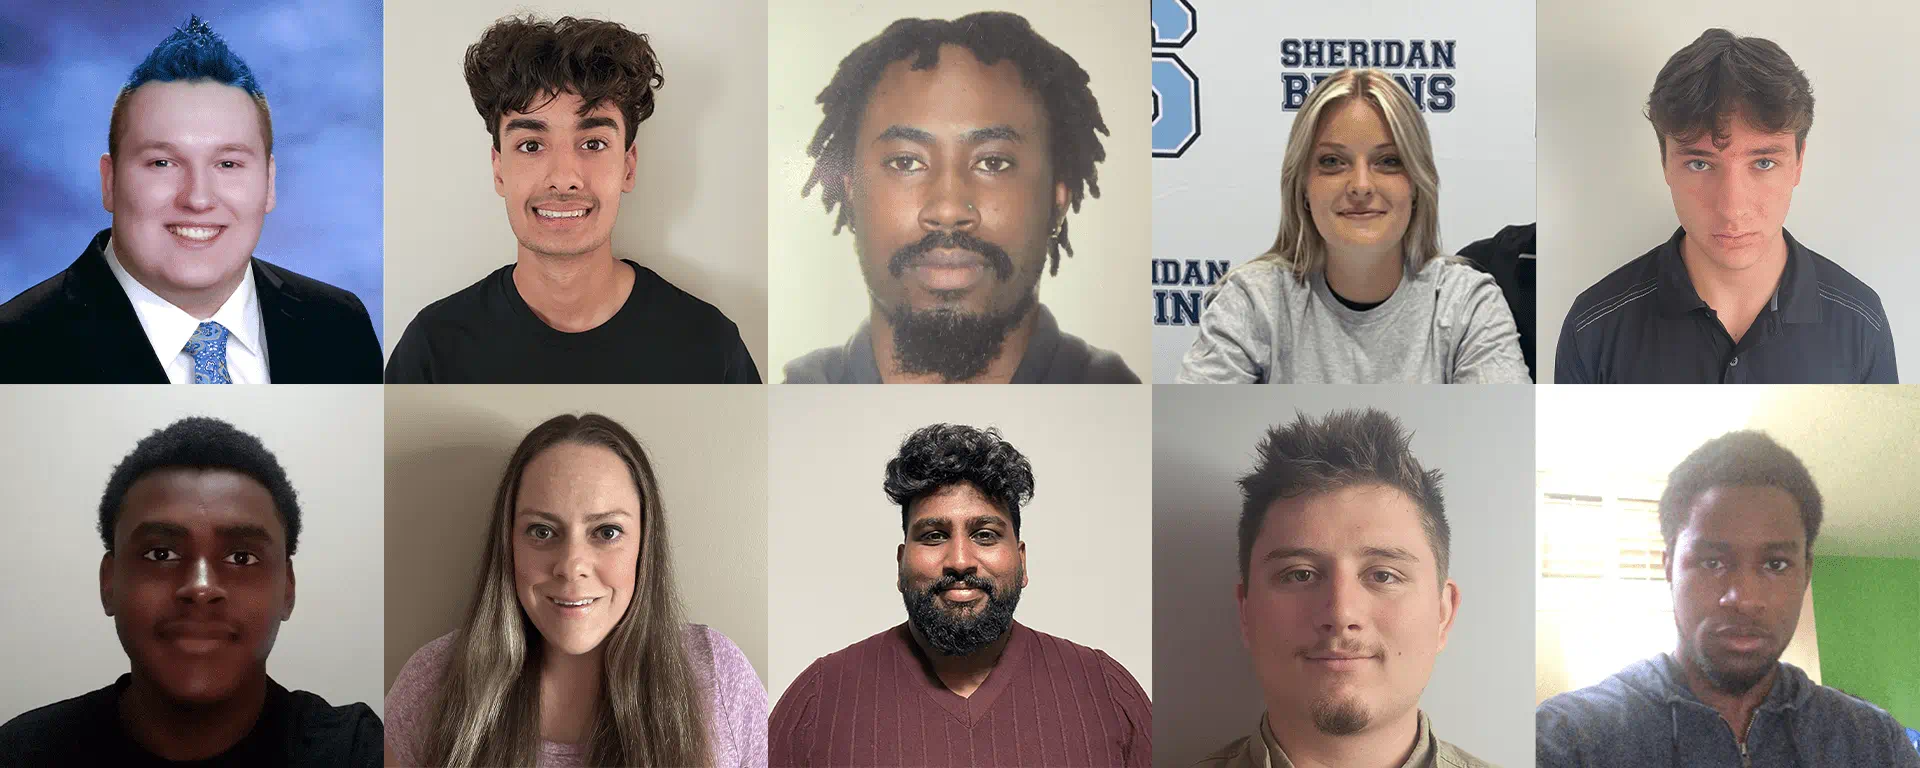 Headshots of the 10 incoming Sheridan skilled trades students who received a Schulich Builders Scholarship for Skilled Trades.